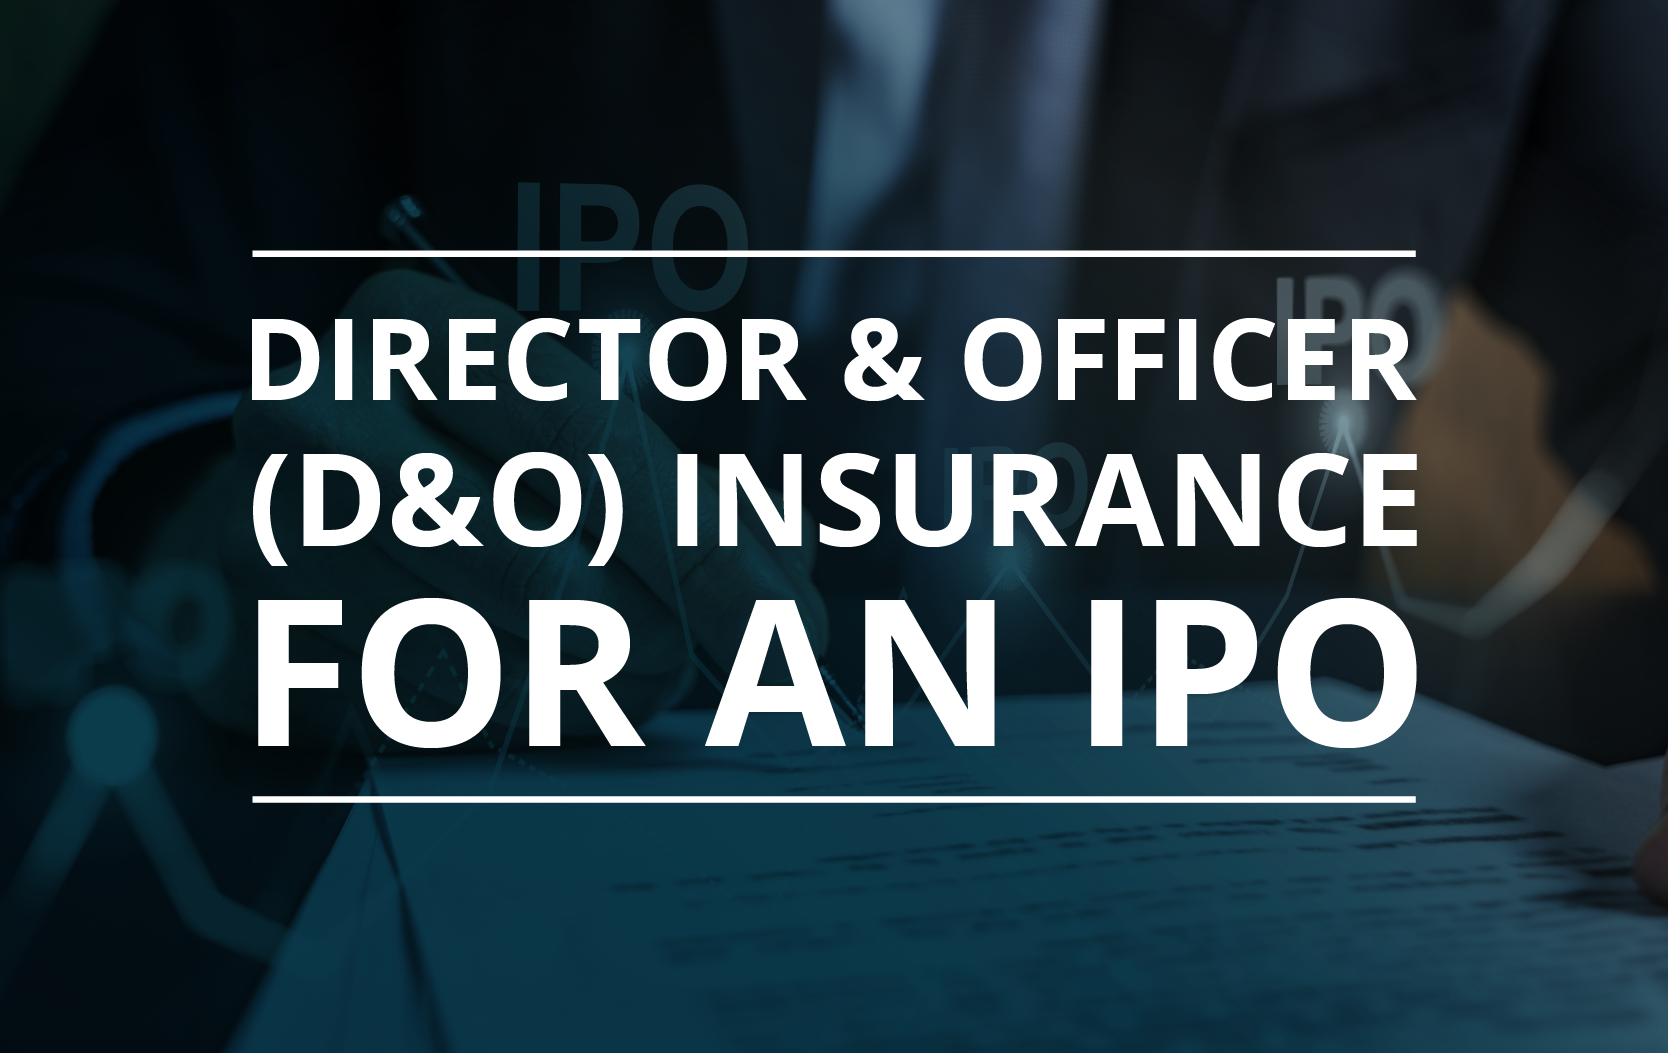 image for Director & Officer (D&O) Insurance for an IPO